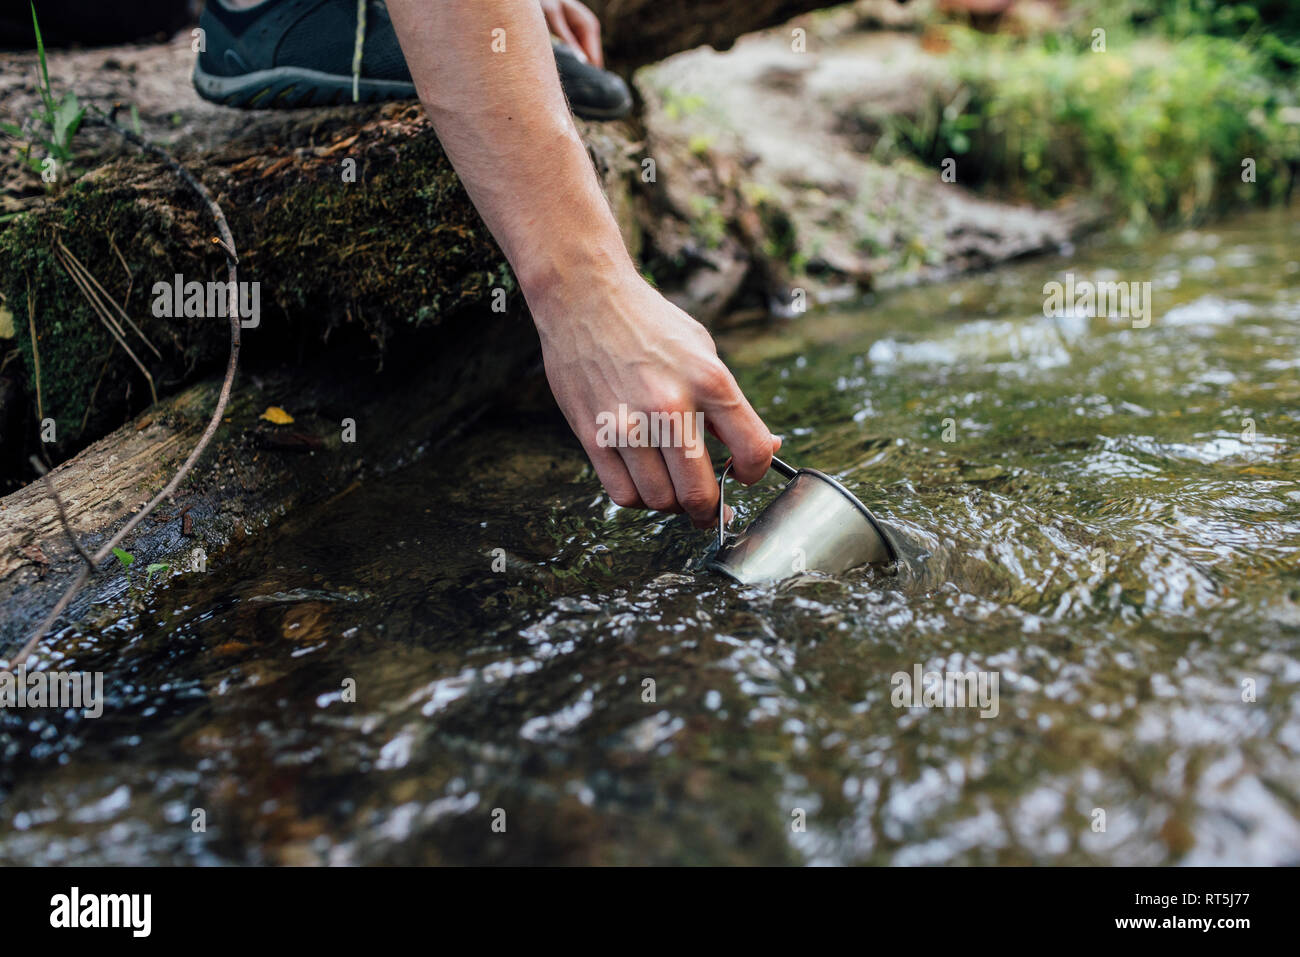 Young man's hand scooping fresh water from a brook, close-up Stock Photo